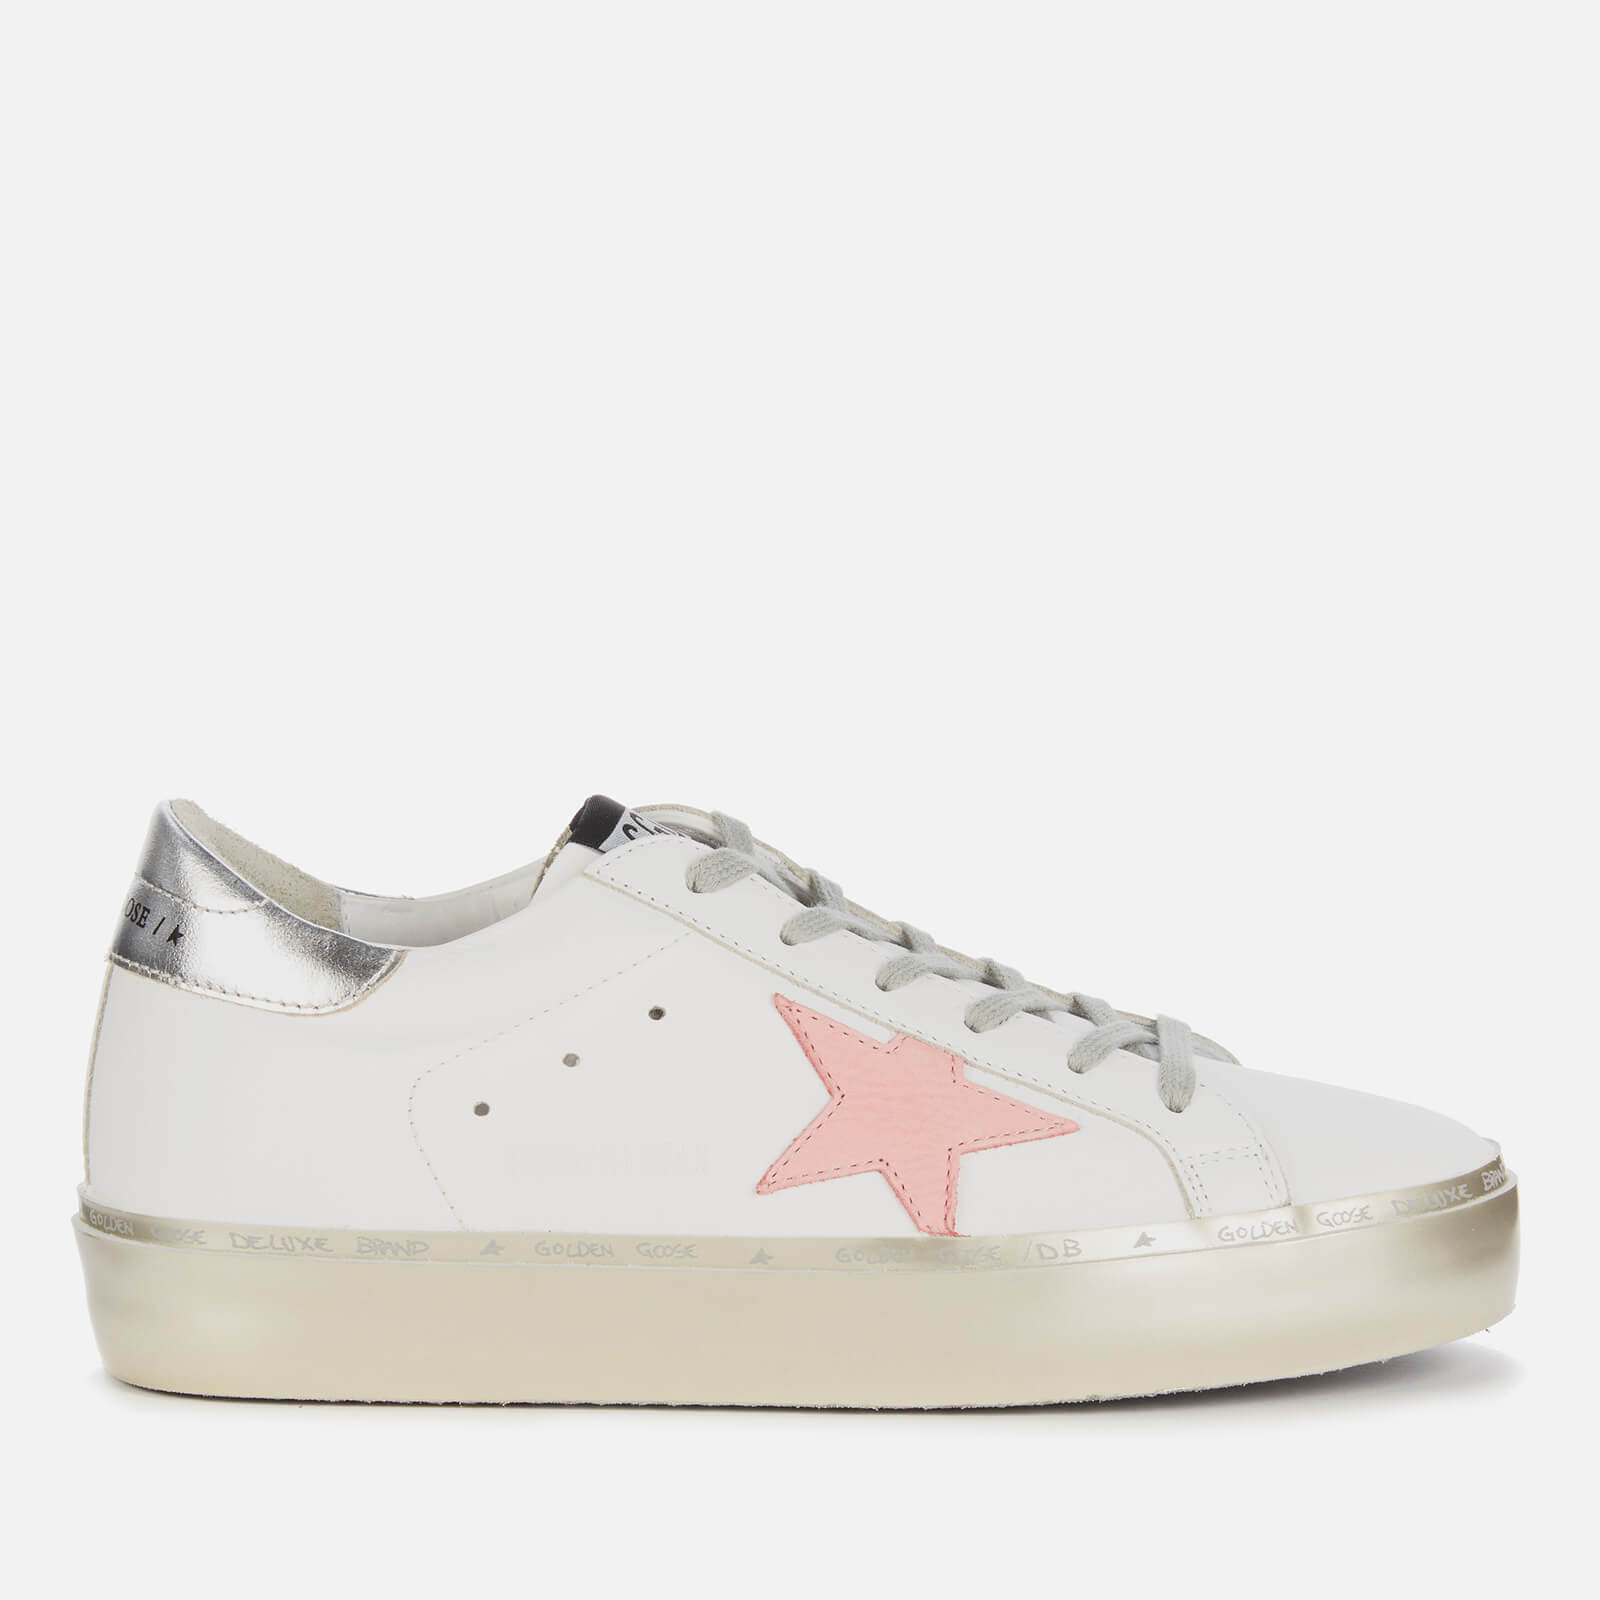 Golden Goose Deluxe Brand Women's Hi Star Leather Flatform Trainers - White/Pink Pastel/Silver/Gold - UK 8